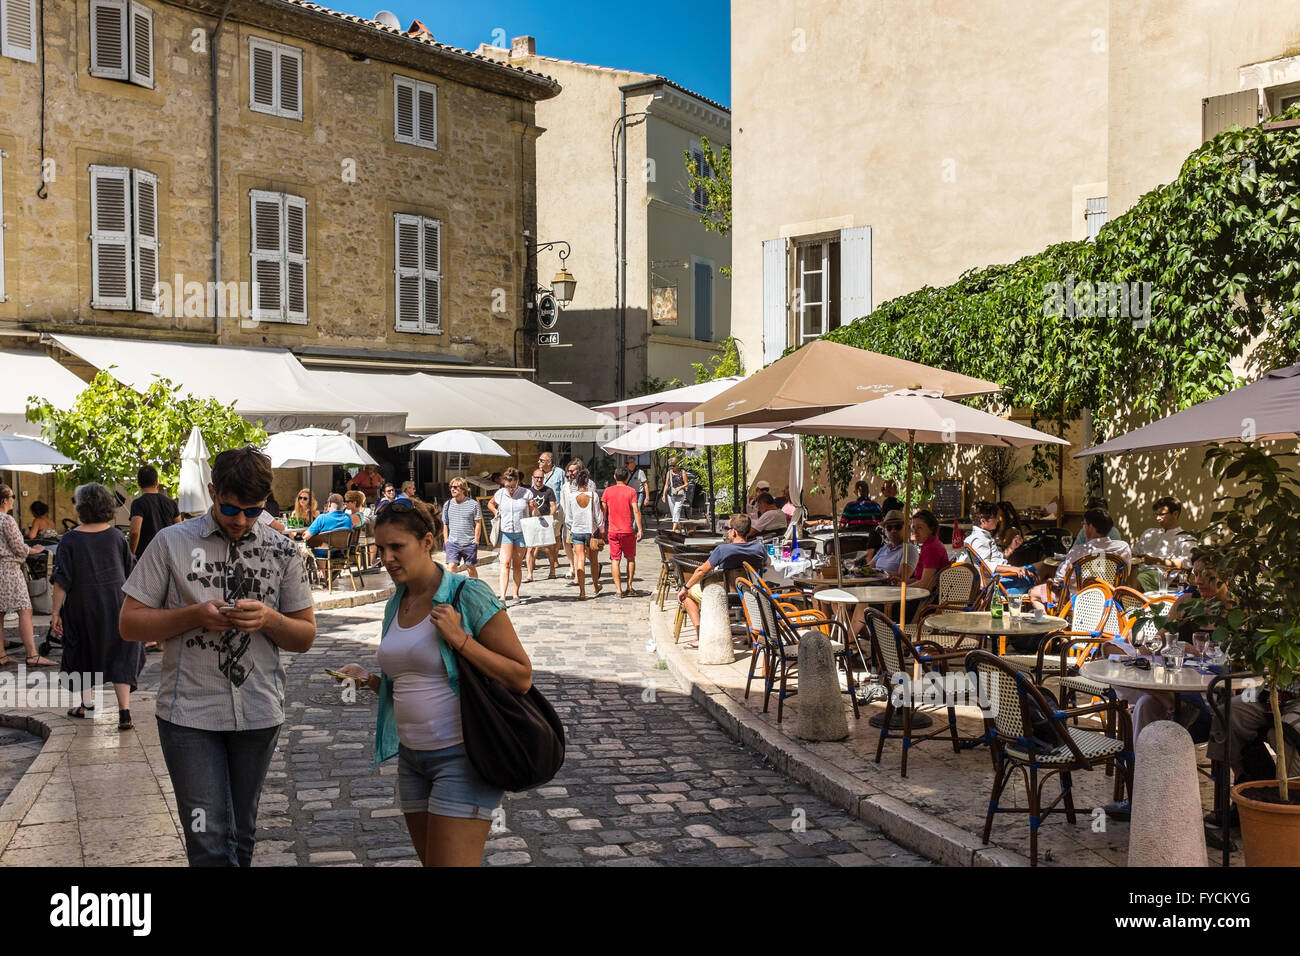 Tourists in the street of Lourmarin, Luberon, PACA, France (Lourmarin is listed as one of the most beautiful villages of France) Stock Photo